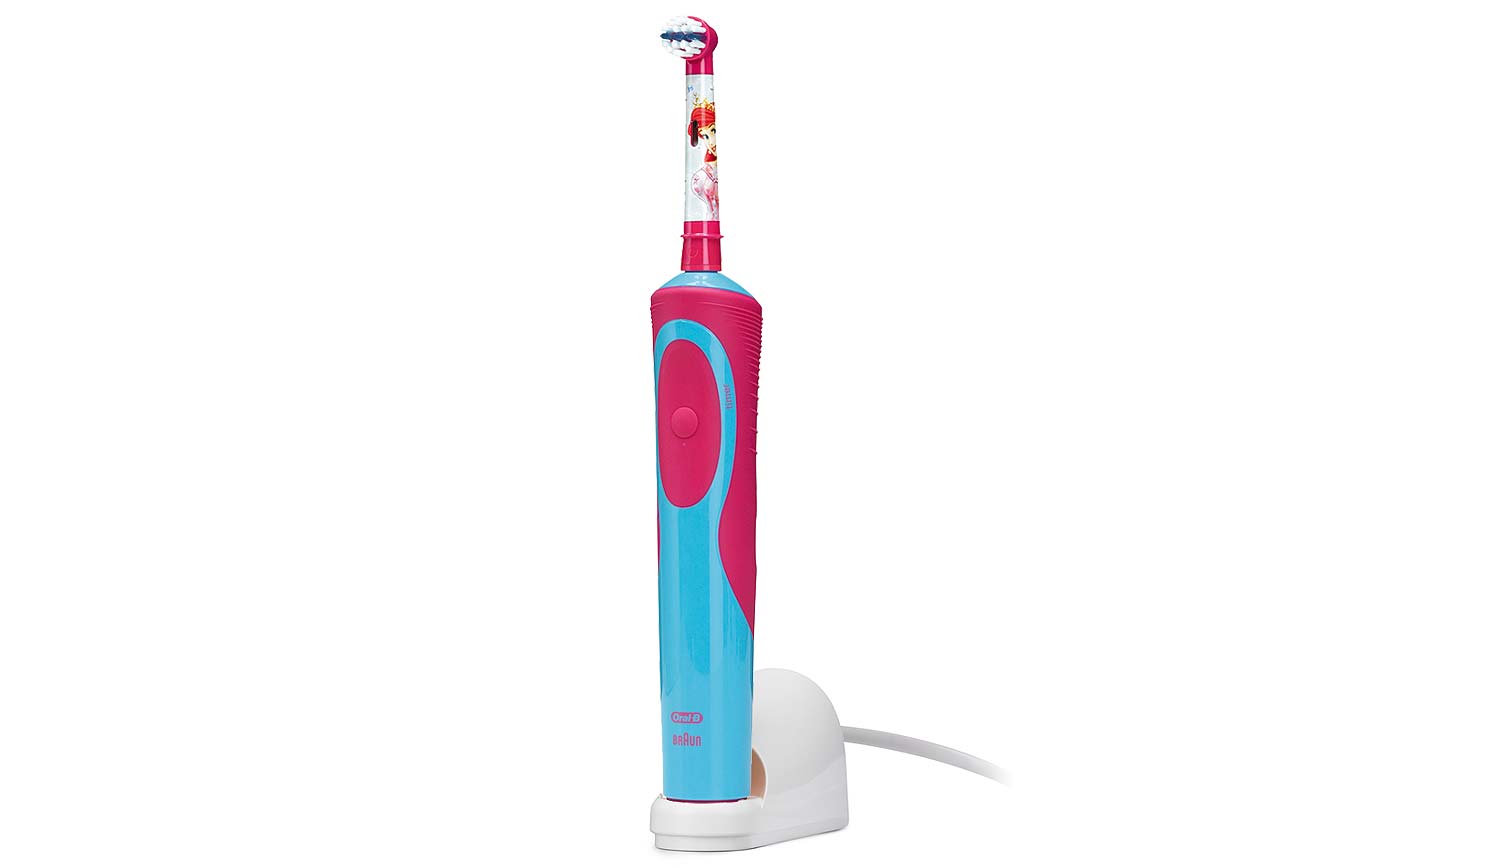 The rounded brush heads and O-R movement will improve your child's brushing.